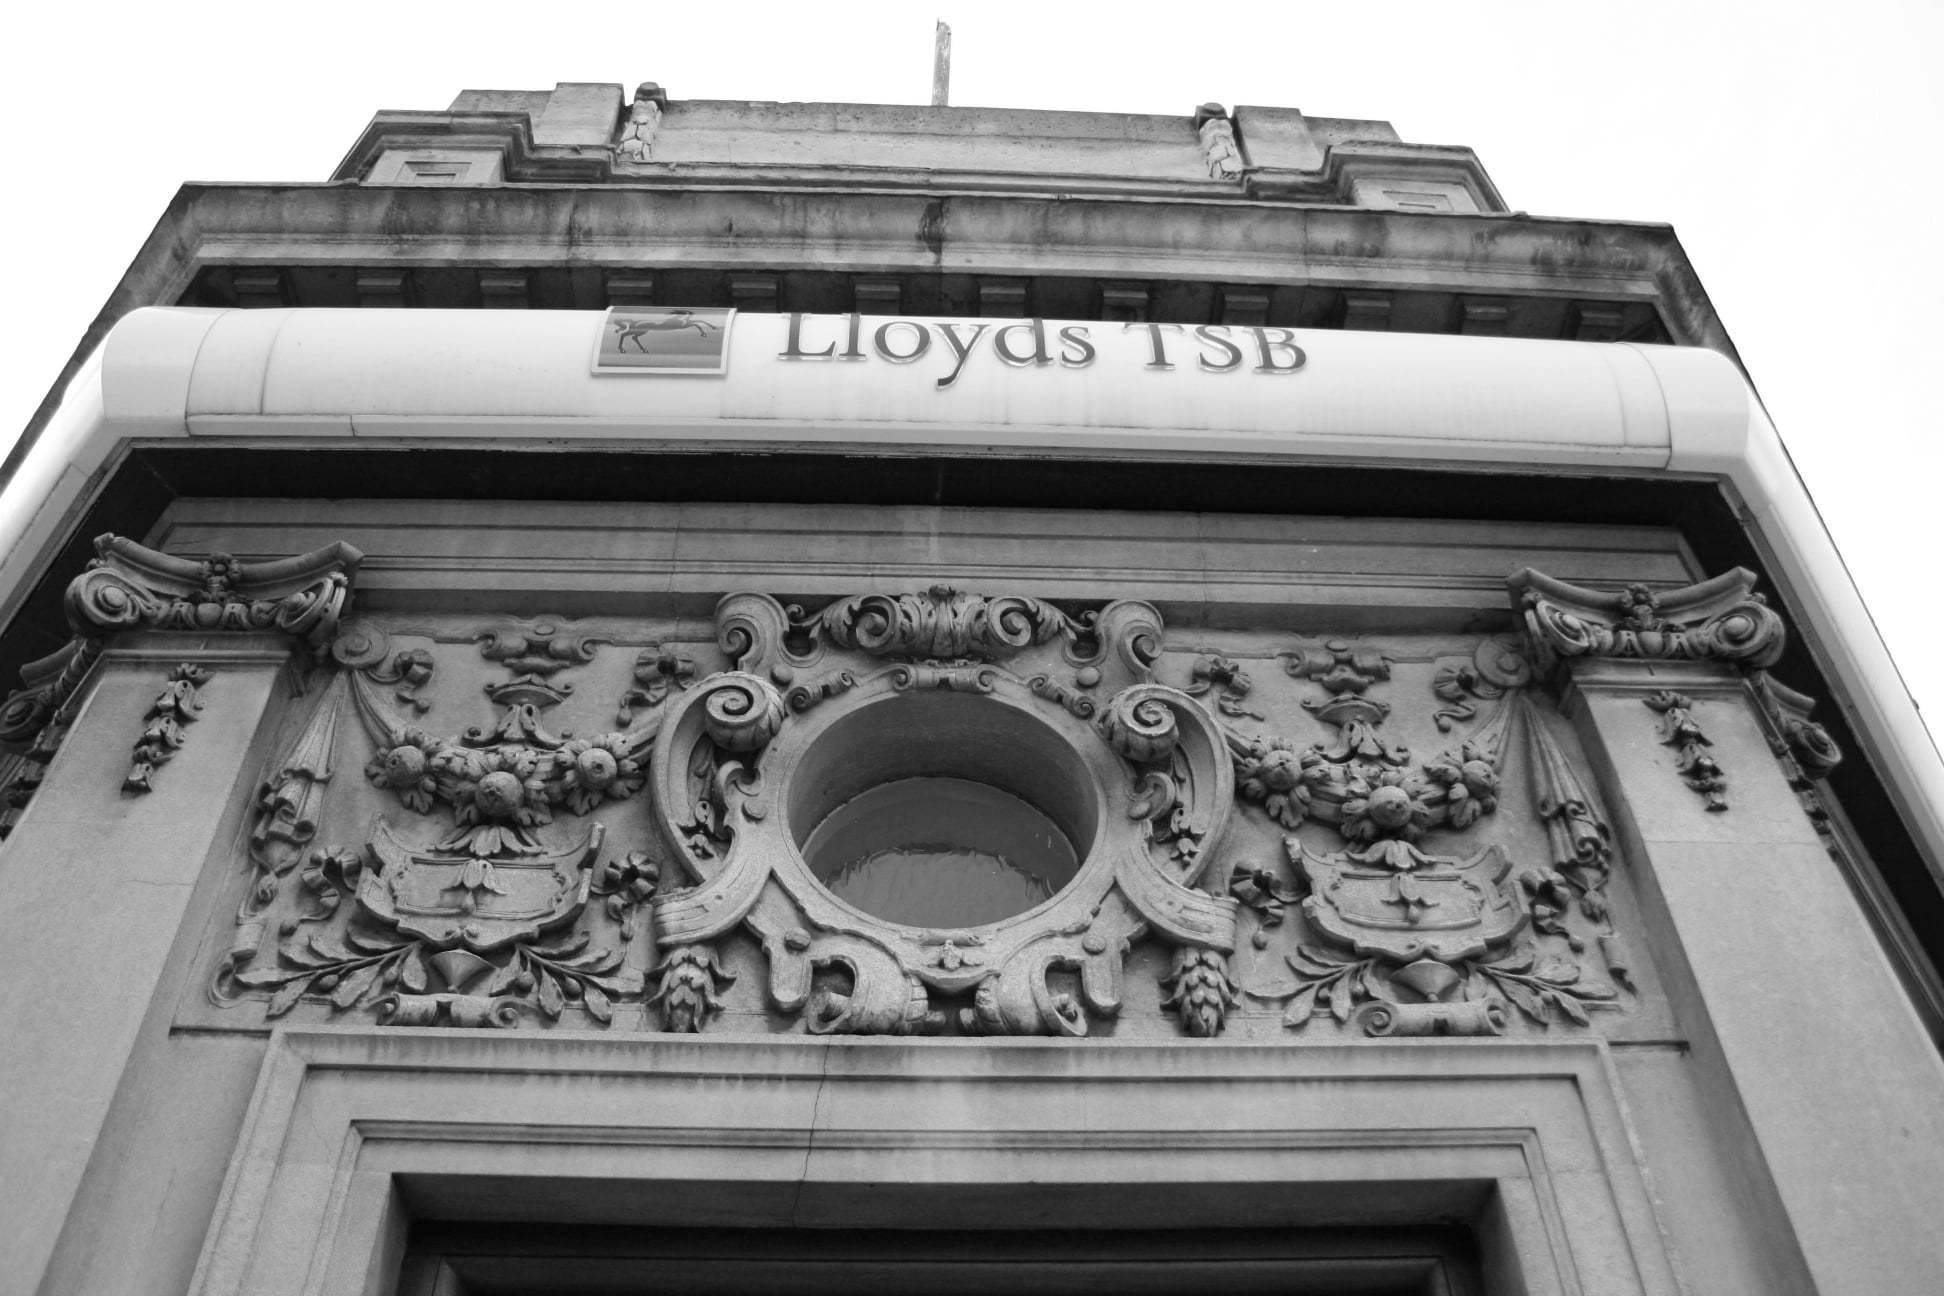 No longer seen - Lloyds TSB boasted a branch on London Road when this shot was captured 10 years ago